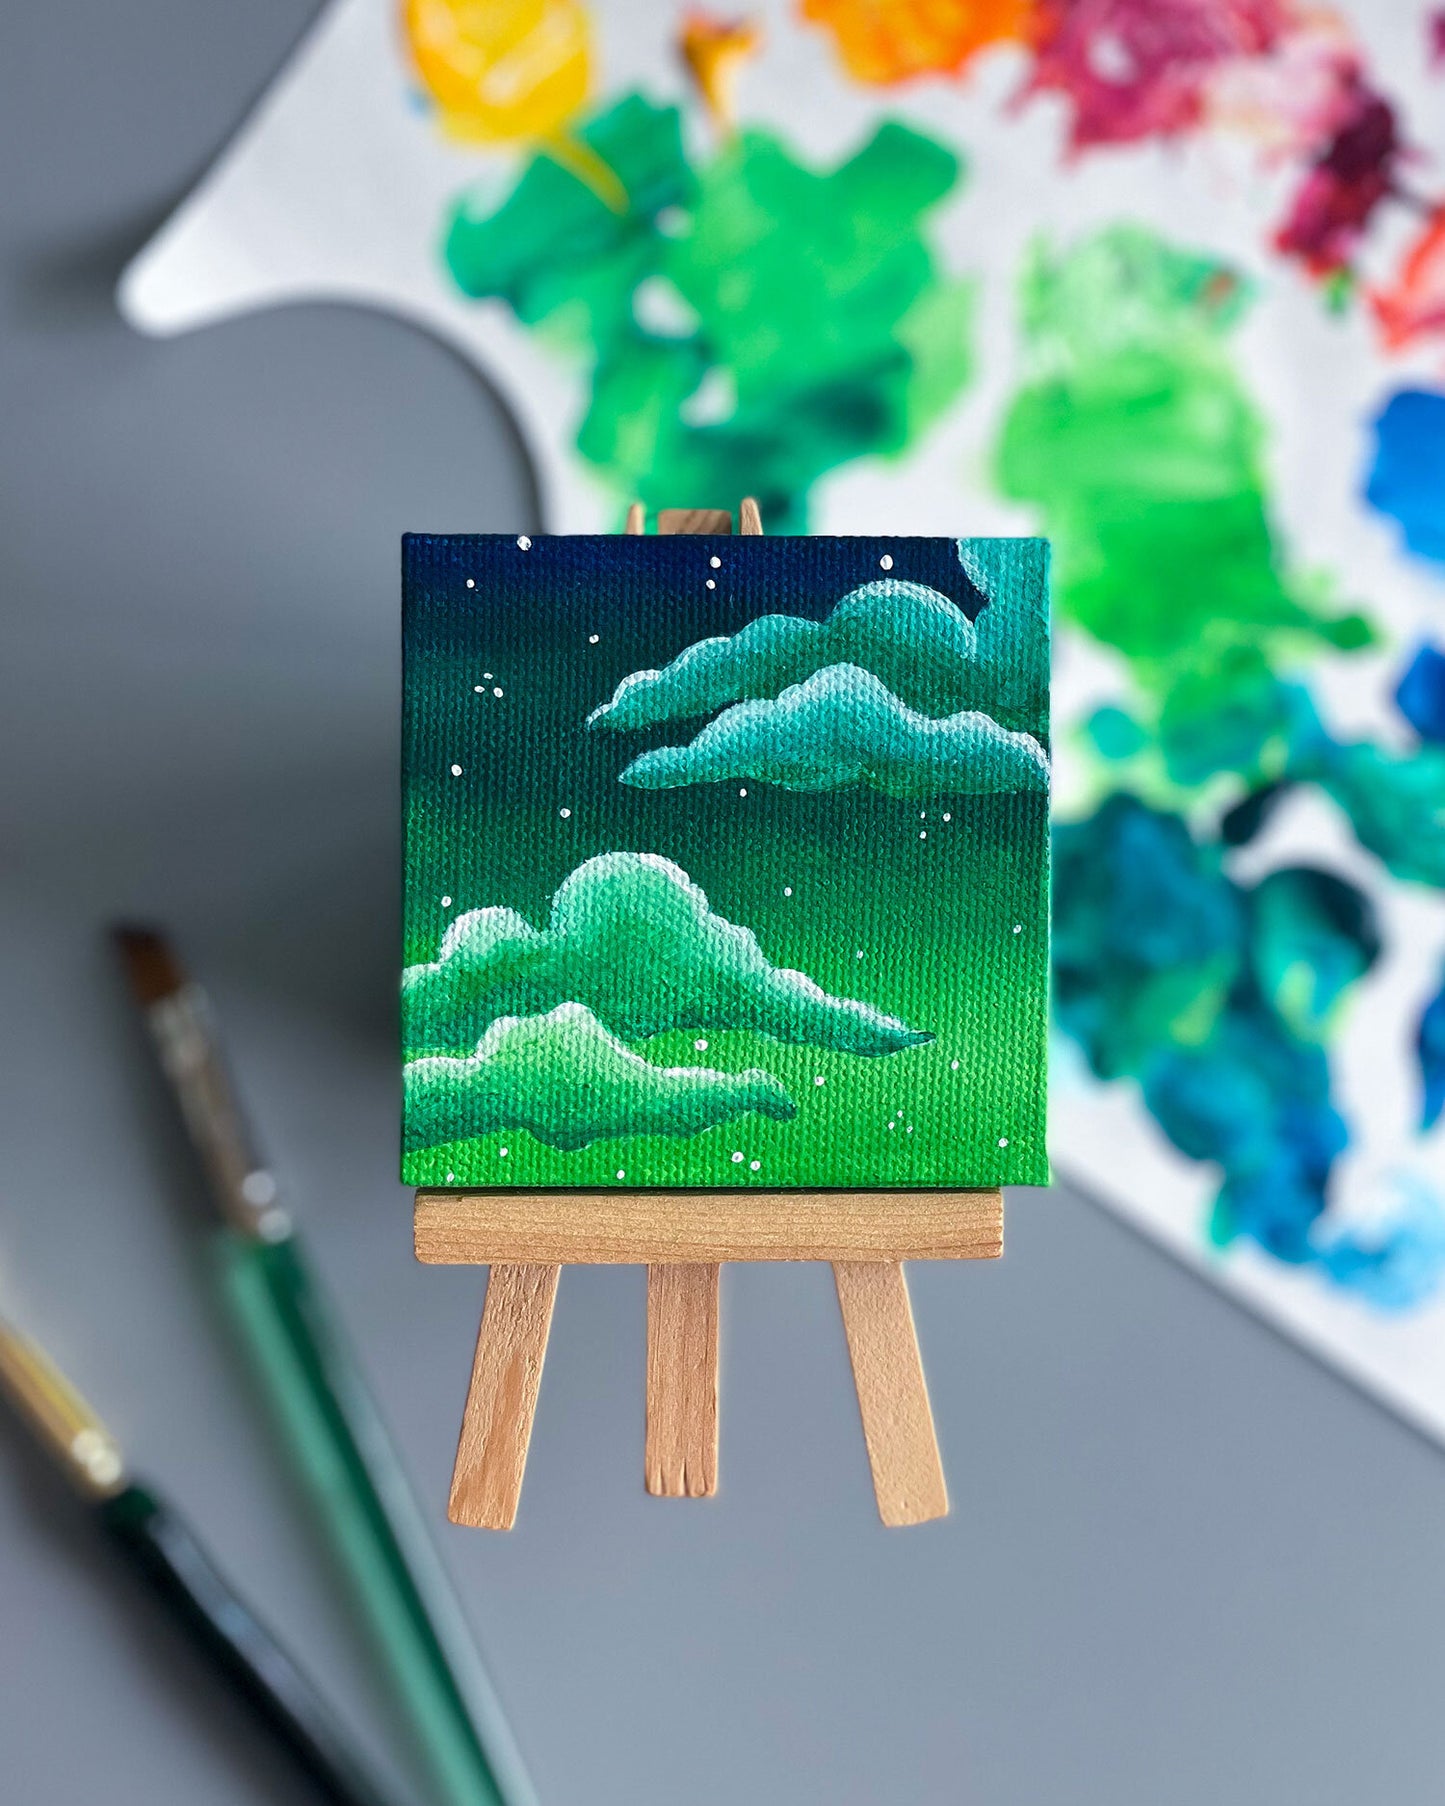 Green Apple Dreams Mini-Painting with Easel